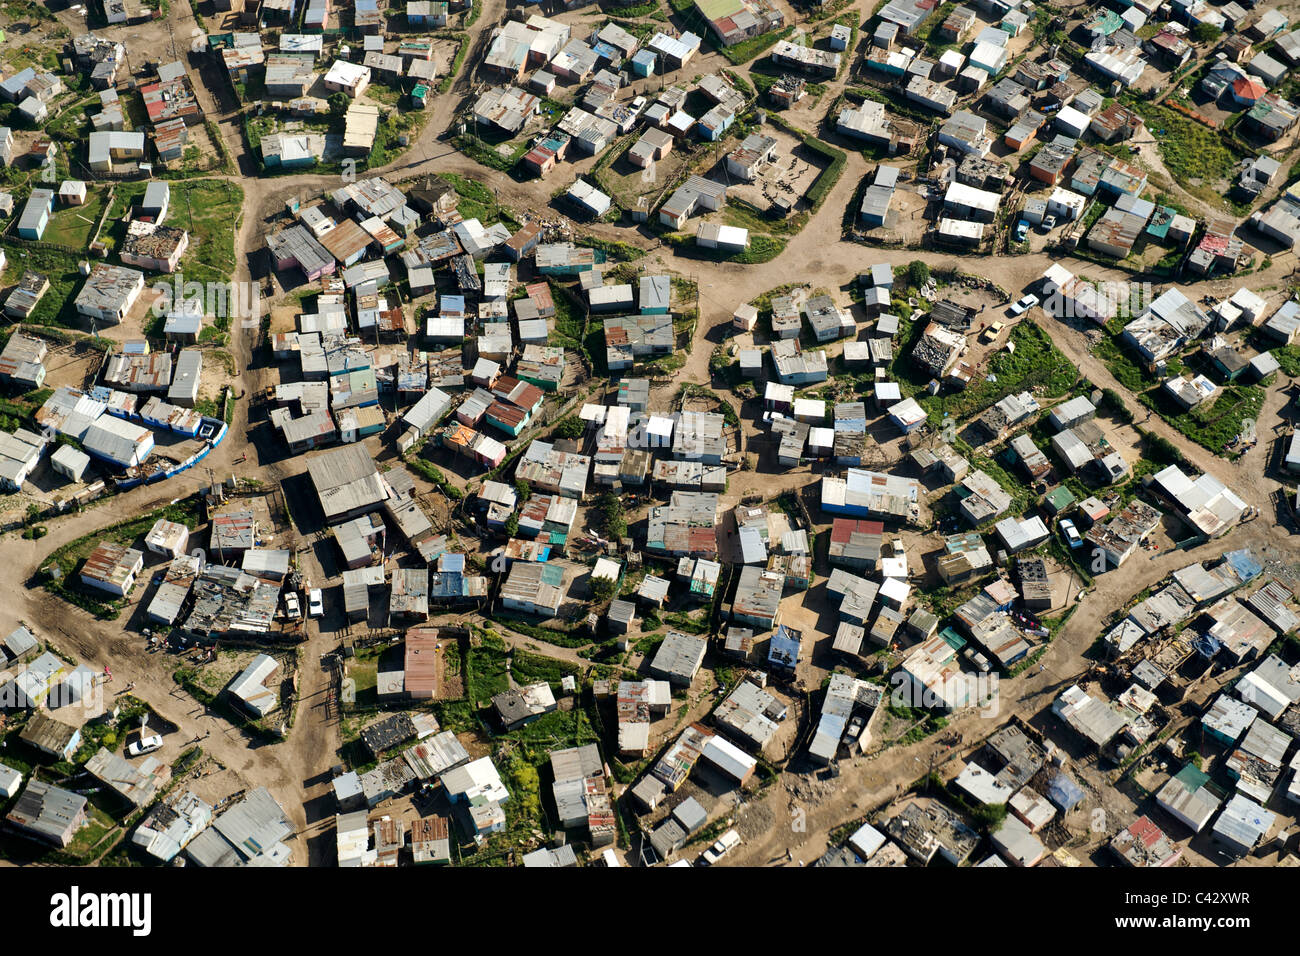 townships near cape town south africa